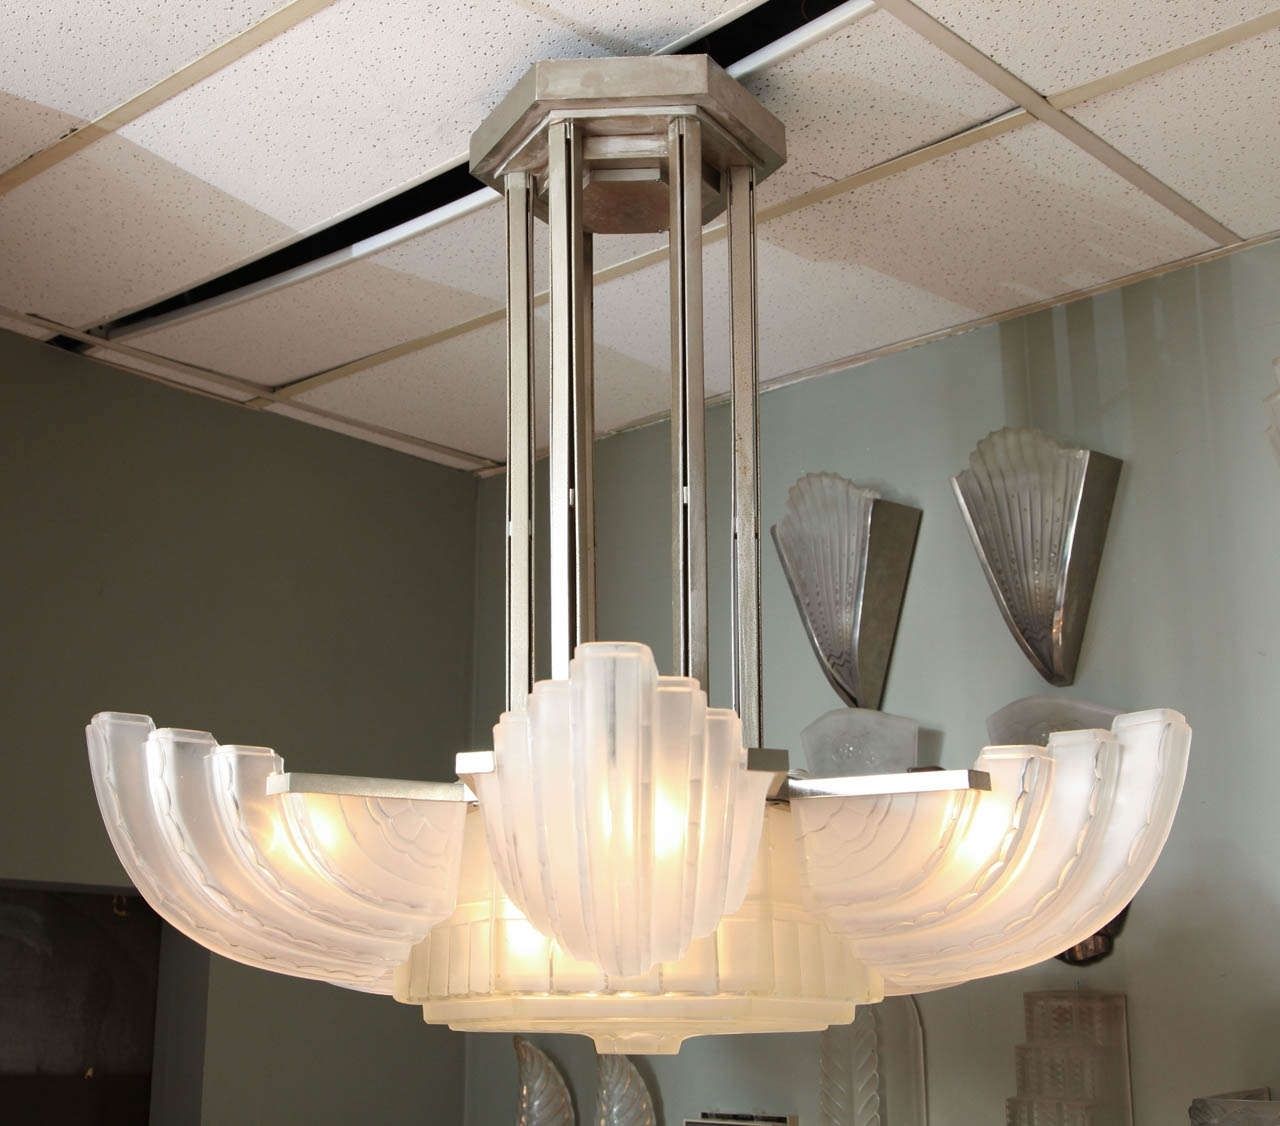 Large Art Deco Chandelier With Best And Newest Large And Important Art Deco Chandeliersabino – Paul Stamati Gallery (View 10 of 20)